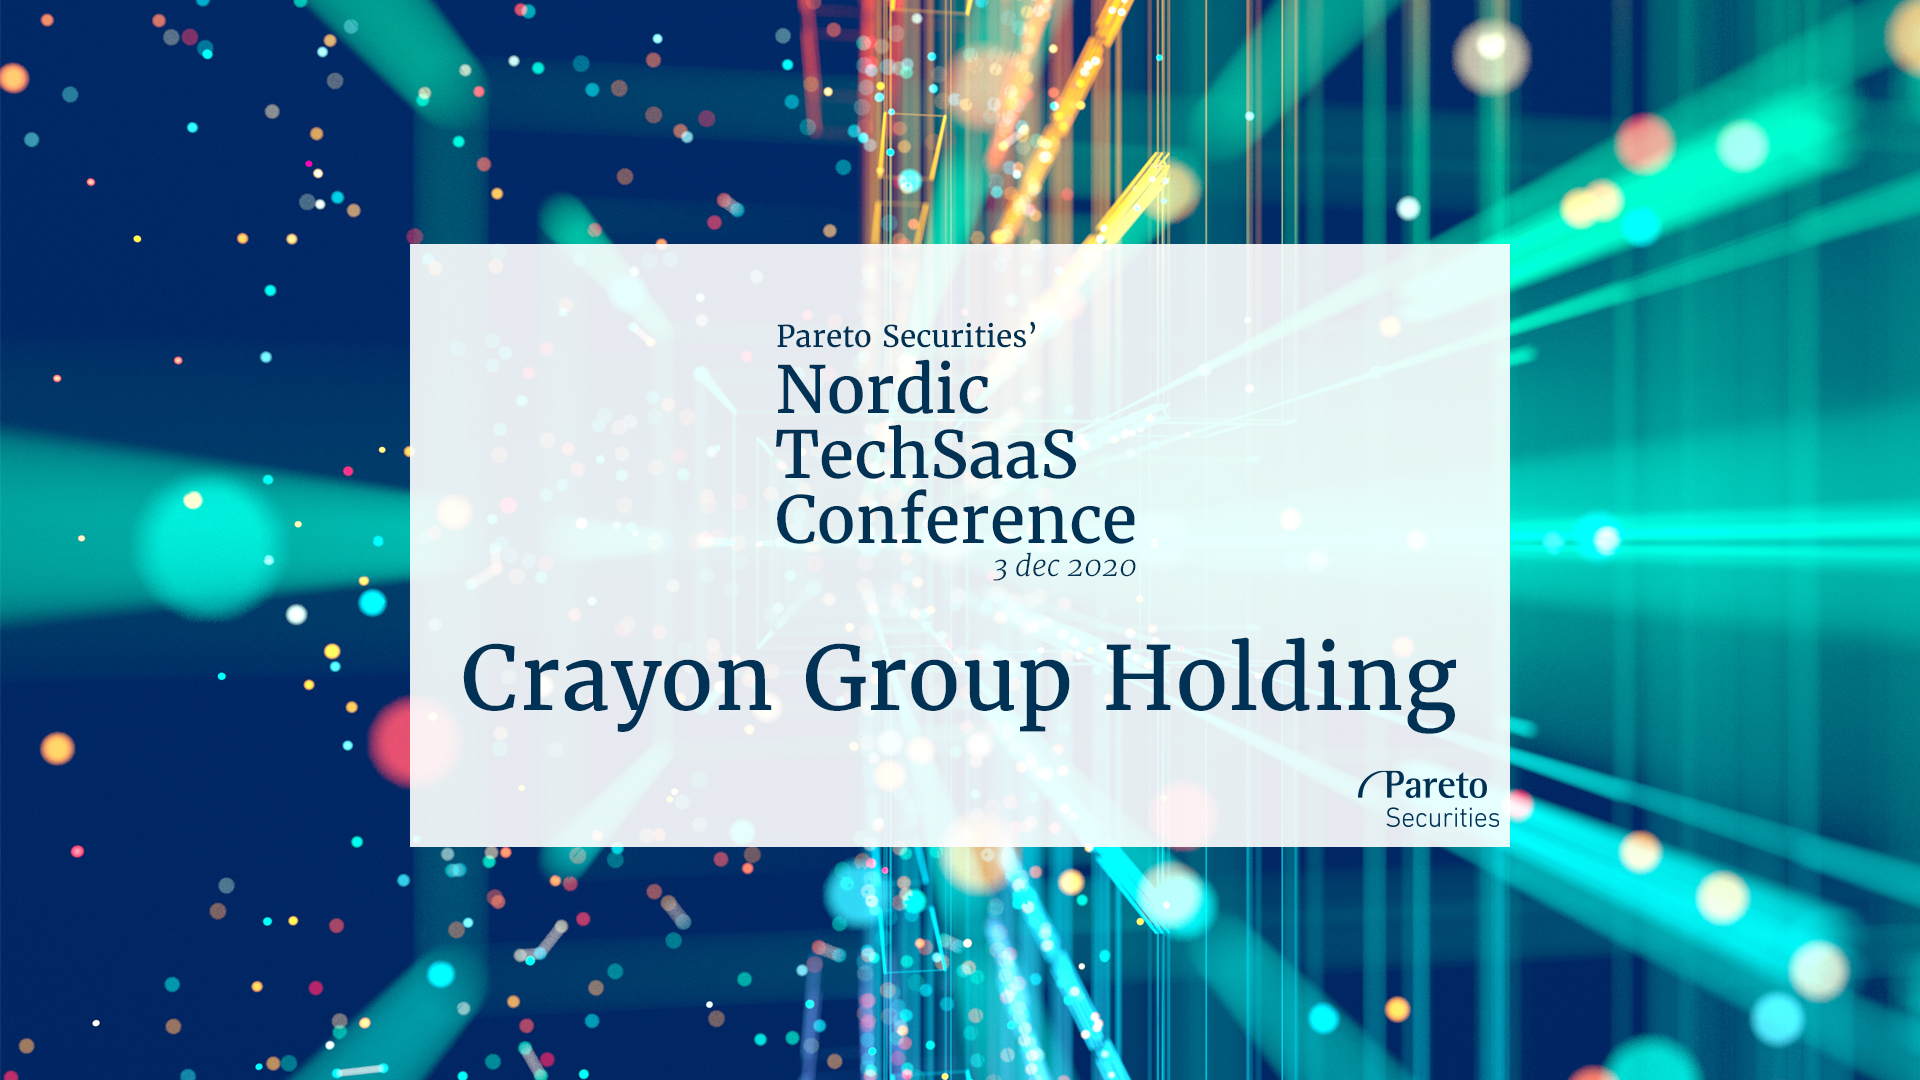 Crayon Group Holding / Pareto Securities’ virtual Nordic TechSaaS Conference